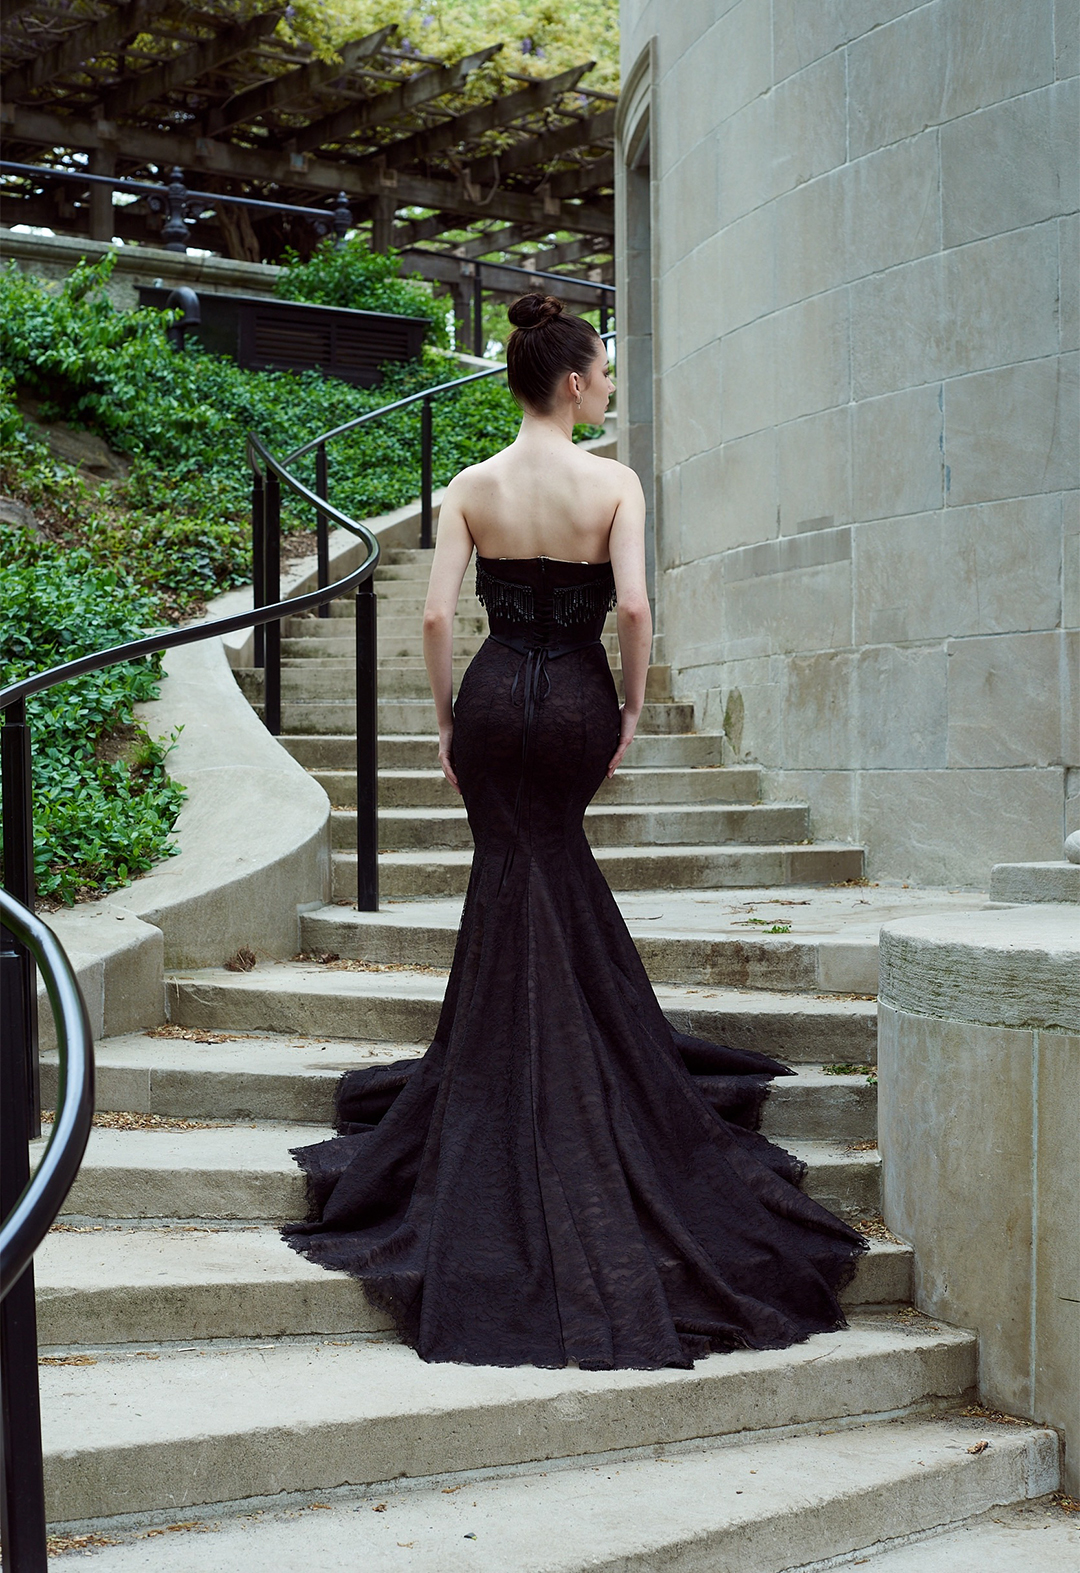 Back view of model standing with hands resting on low hips. Full body shot with neutral stone background staircase.